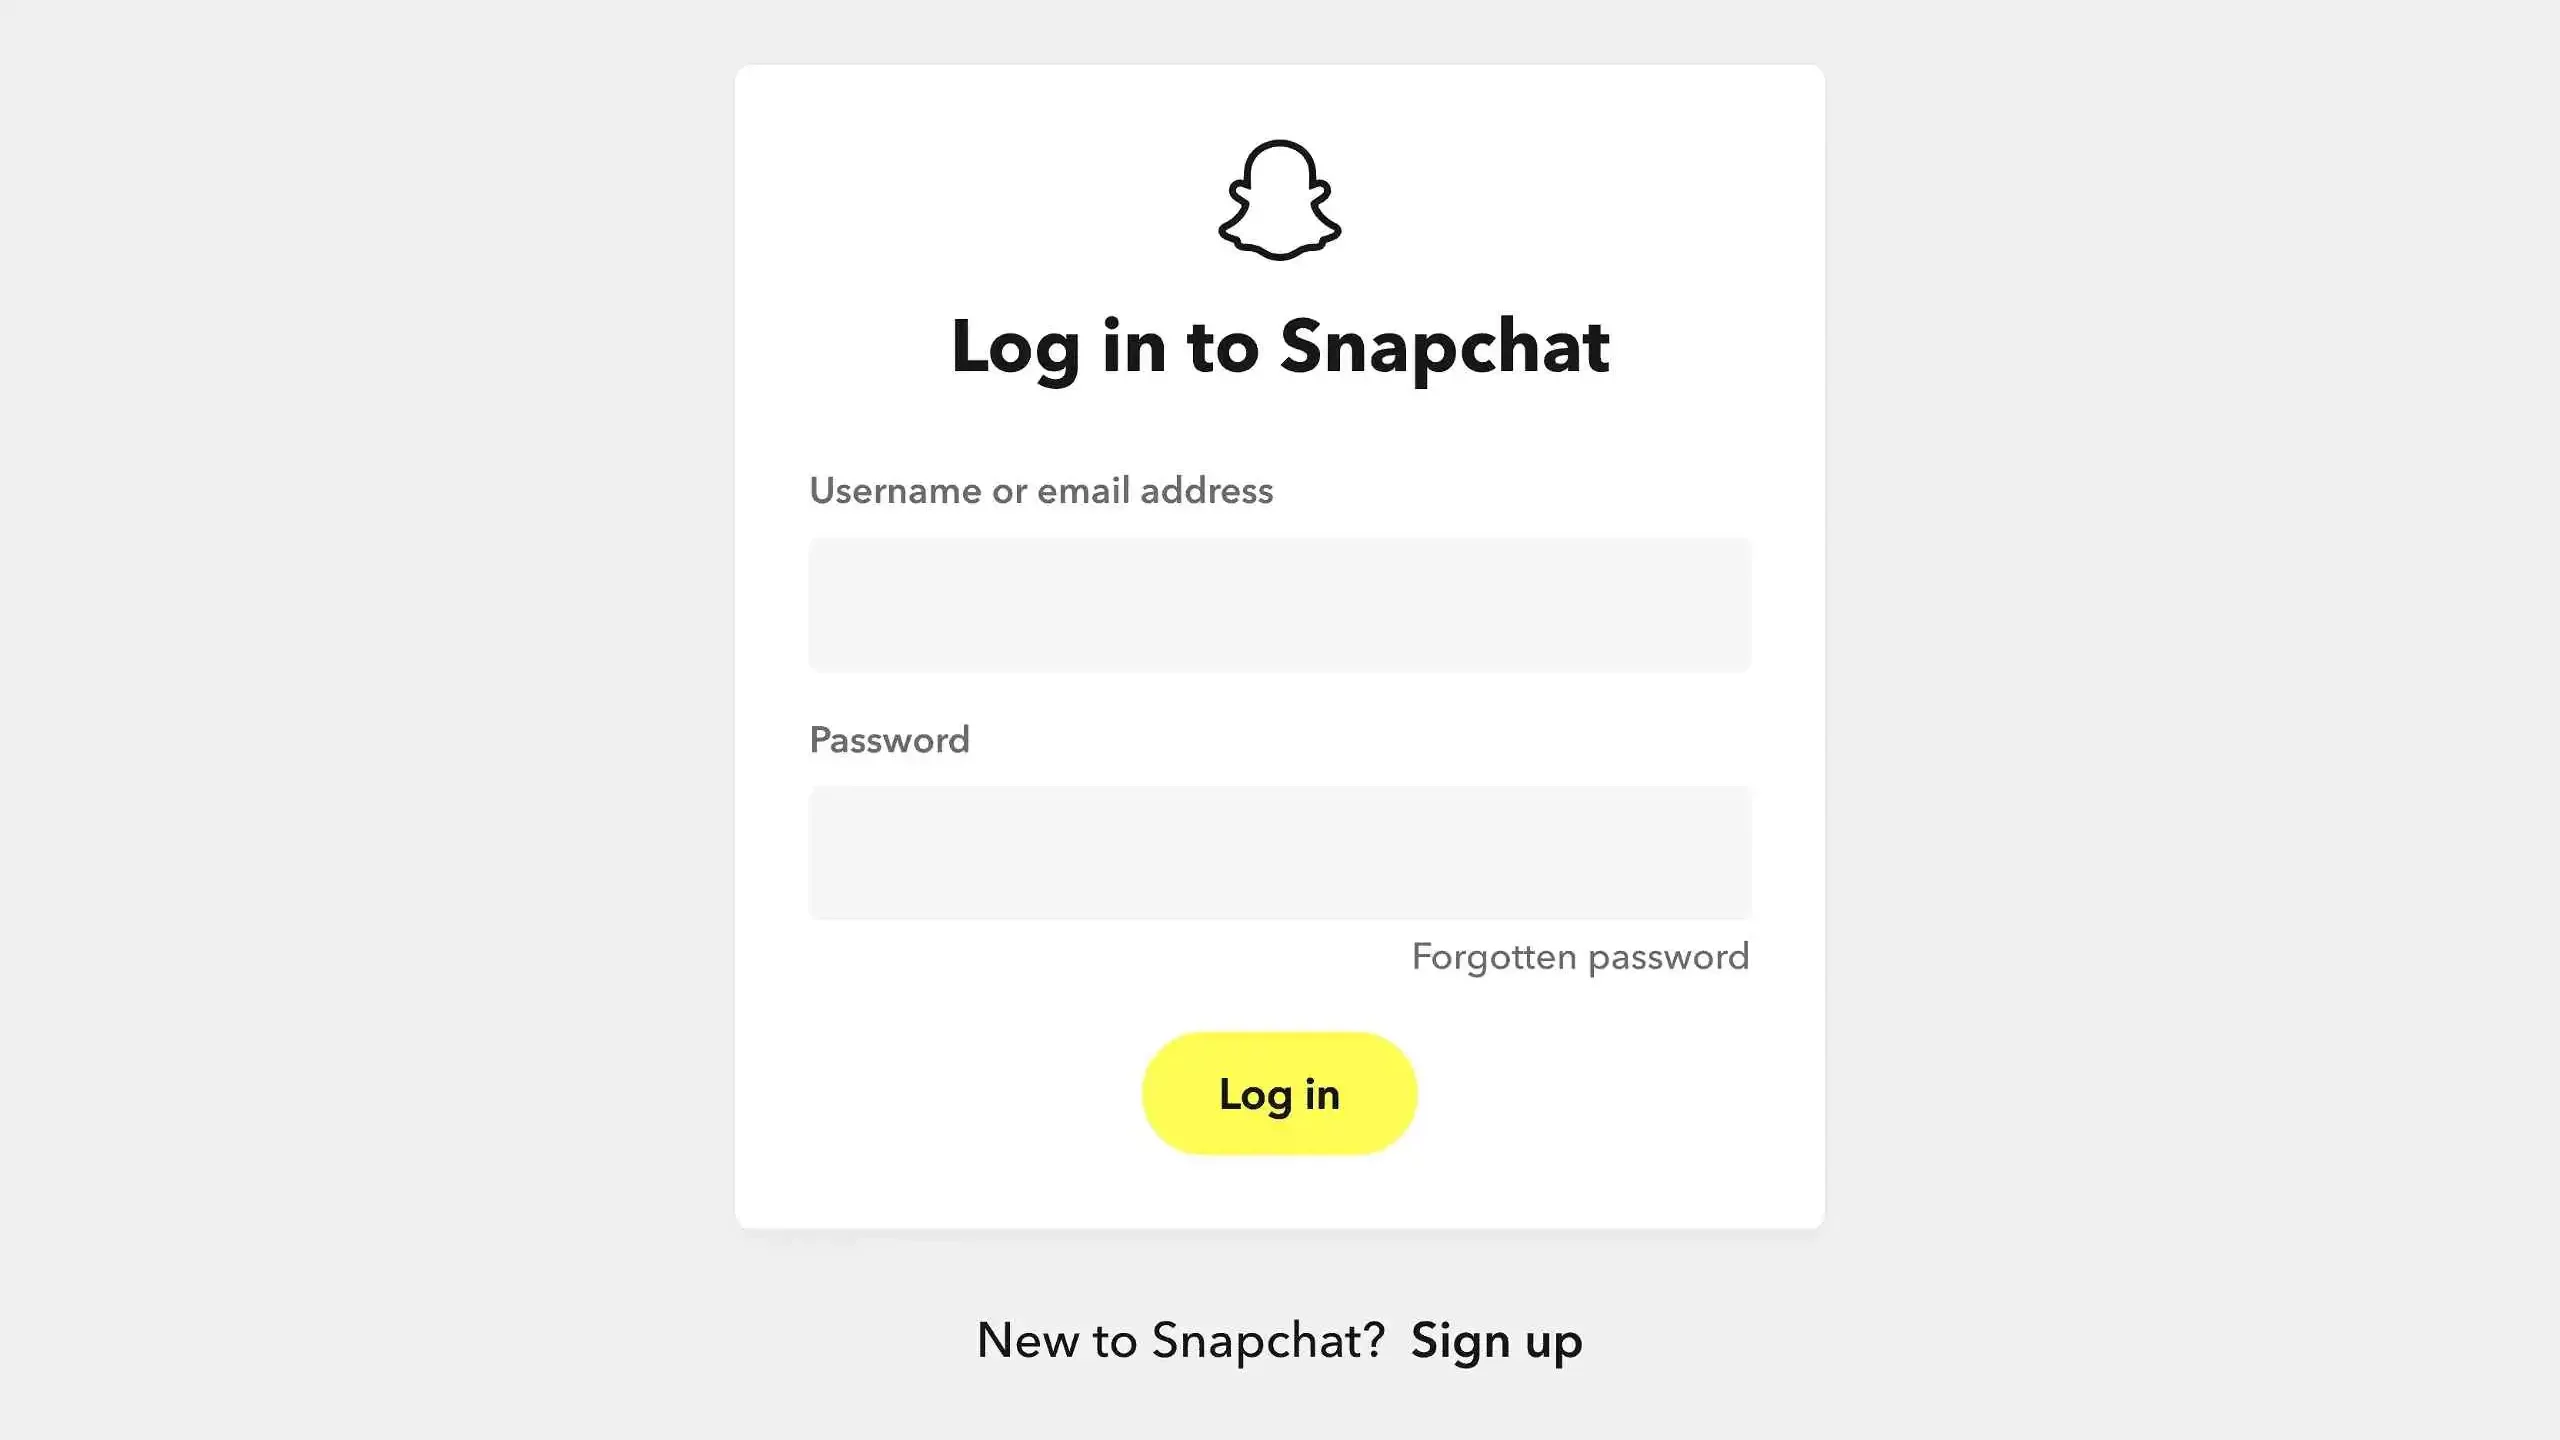 What Is Snapchat Support Code Ss06 And 3 Easy Fixes For It!